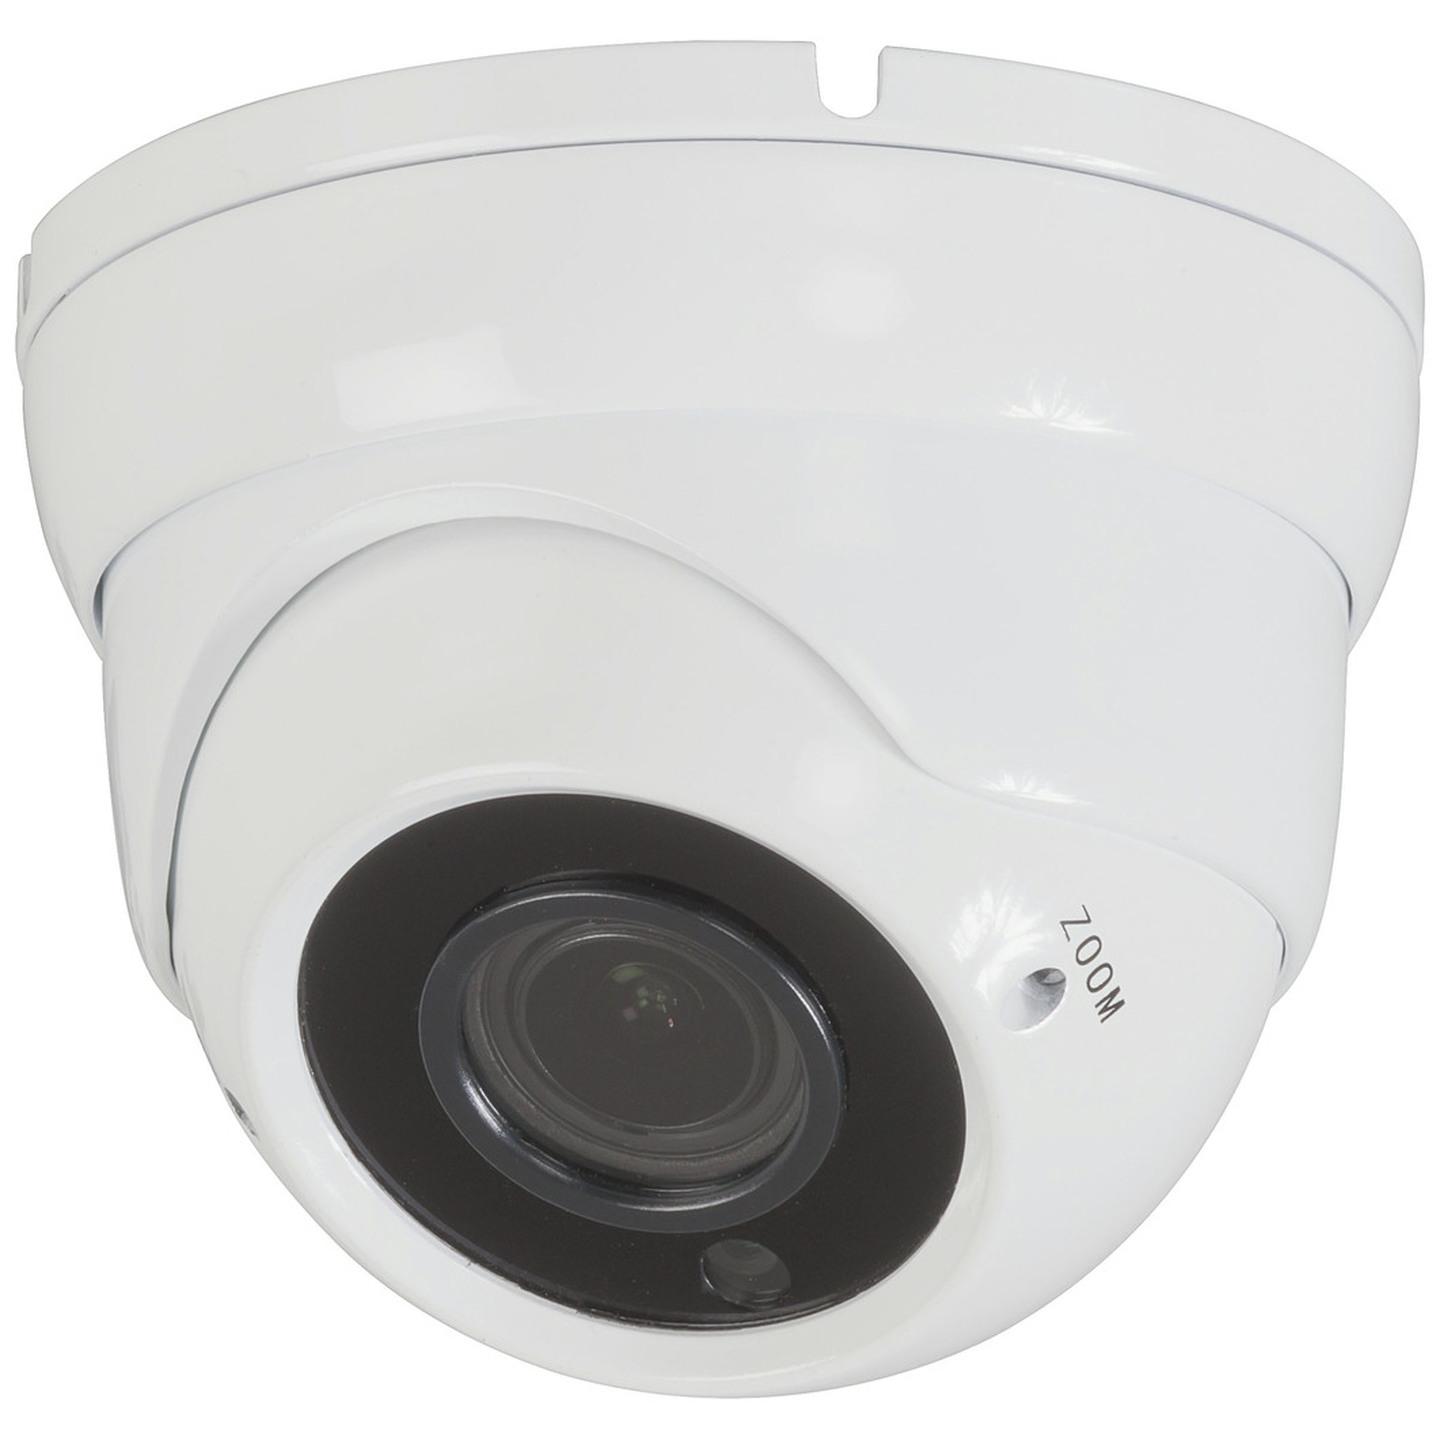 1080p AHD Starlight Dome Camera with Infrared LEDs